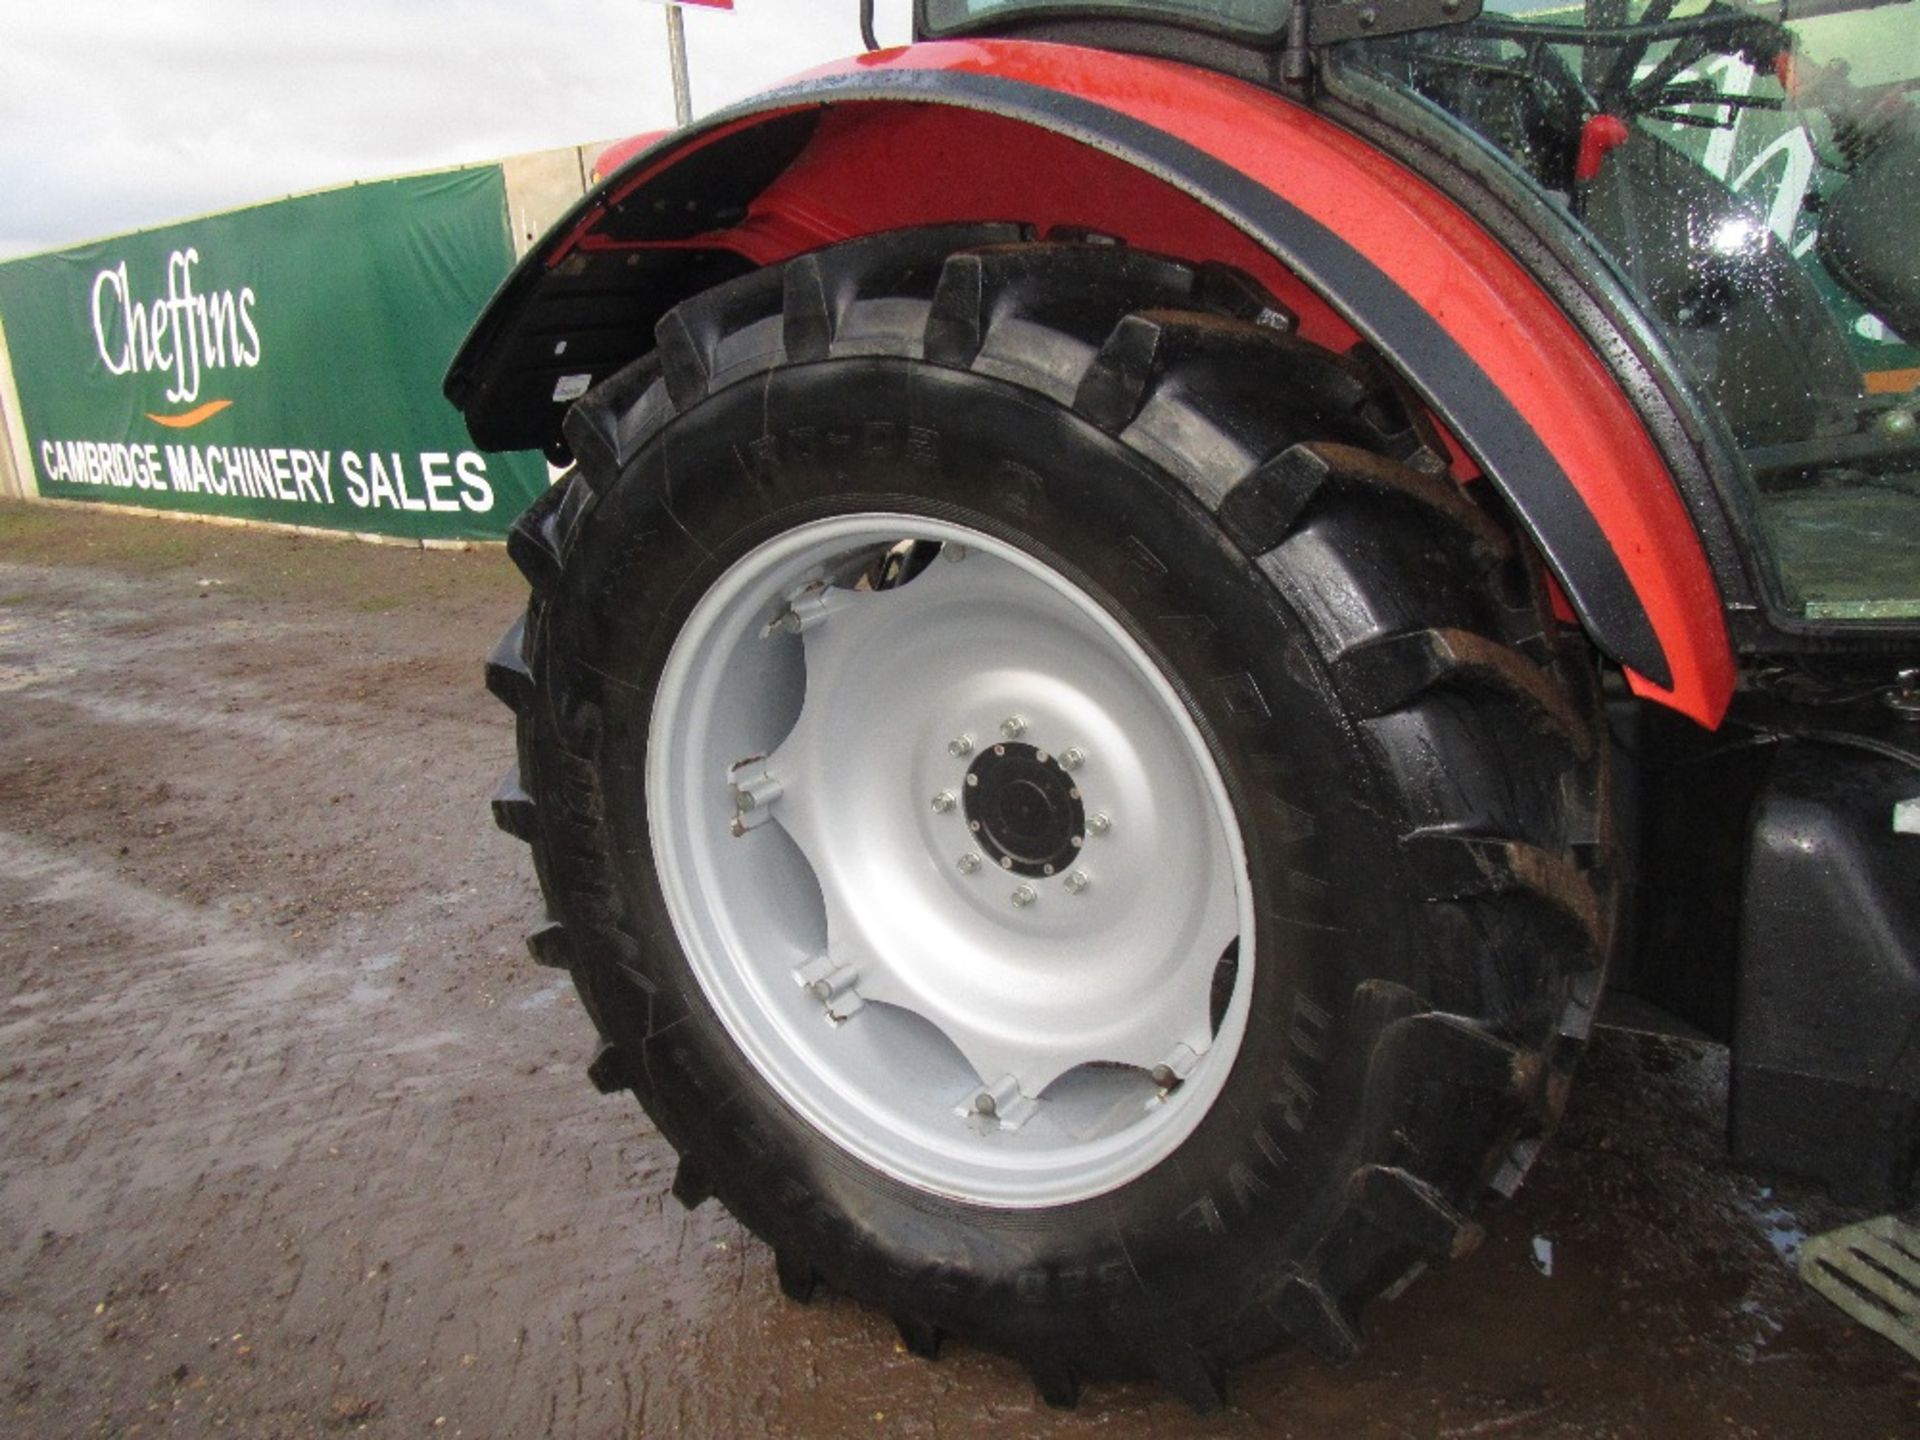 Zetor Forterra 125 4wd Tractor. 260 Trac Lift Loader. Reg Docs will be supplied. Reg. No. AE12 BKN. - Image 6 of 15